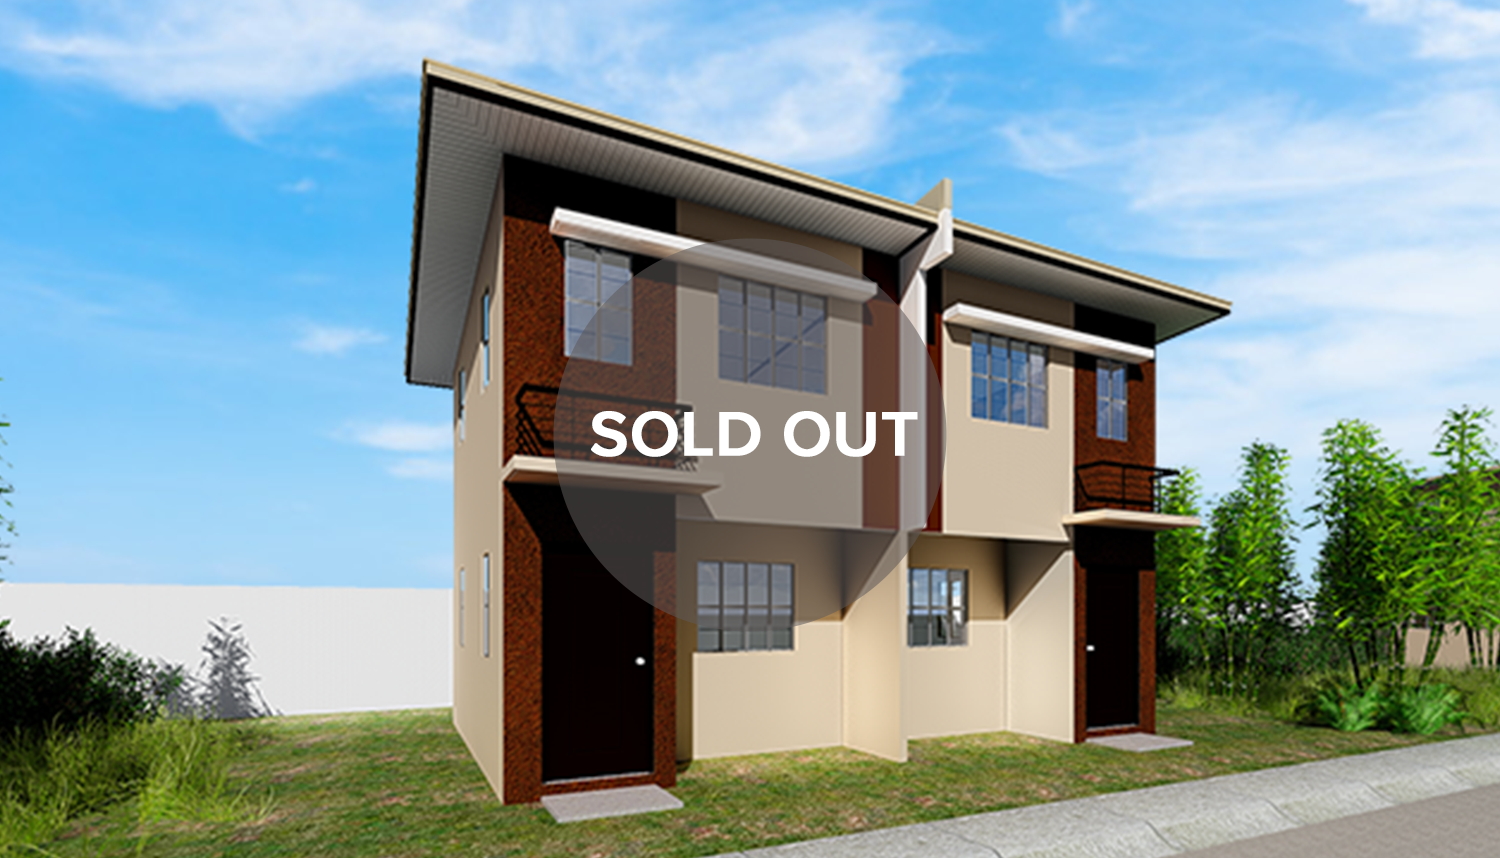 /assets/properties-house-model-gallery-and-landmarks-icons/lumina-home-models/home-model-gallery/armina-duplex/armina-duplex-artist-perspective-3-sold-out.png